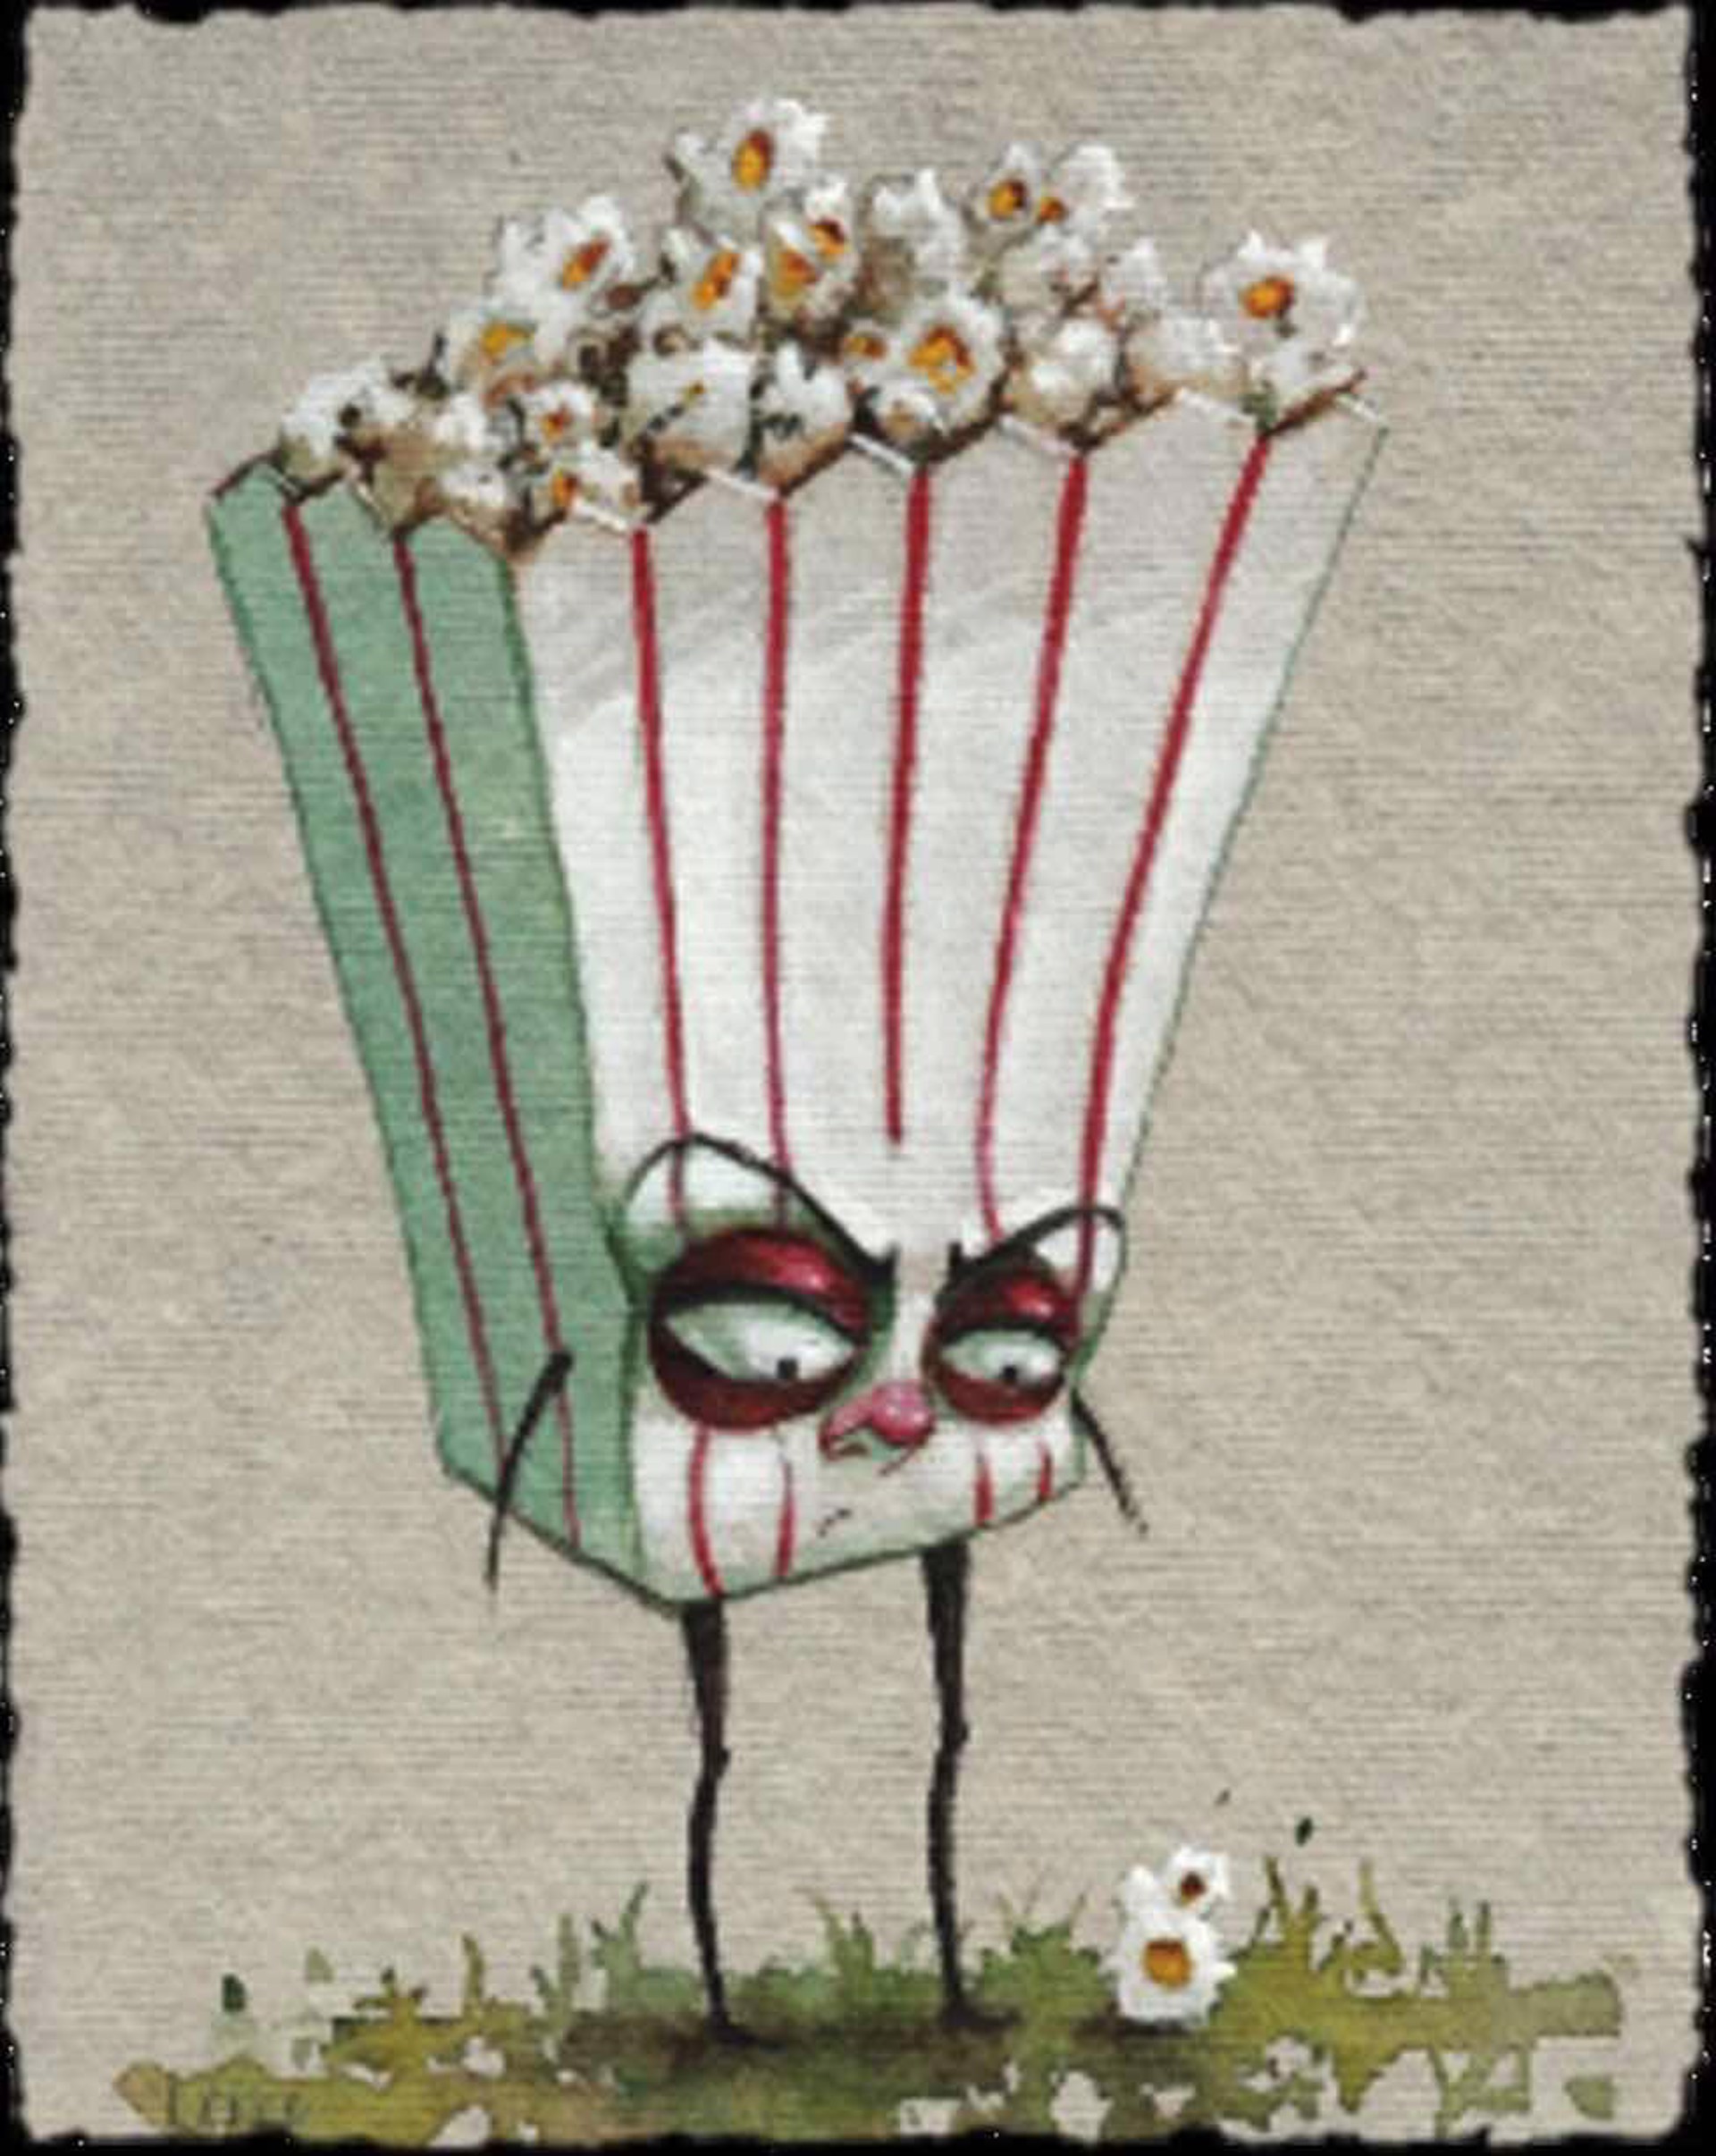 Popcorn of Fury (Giclee on Deckled Paper) G.O. by Liese Chavez